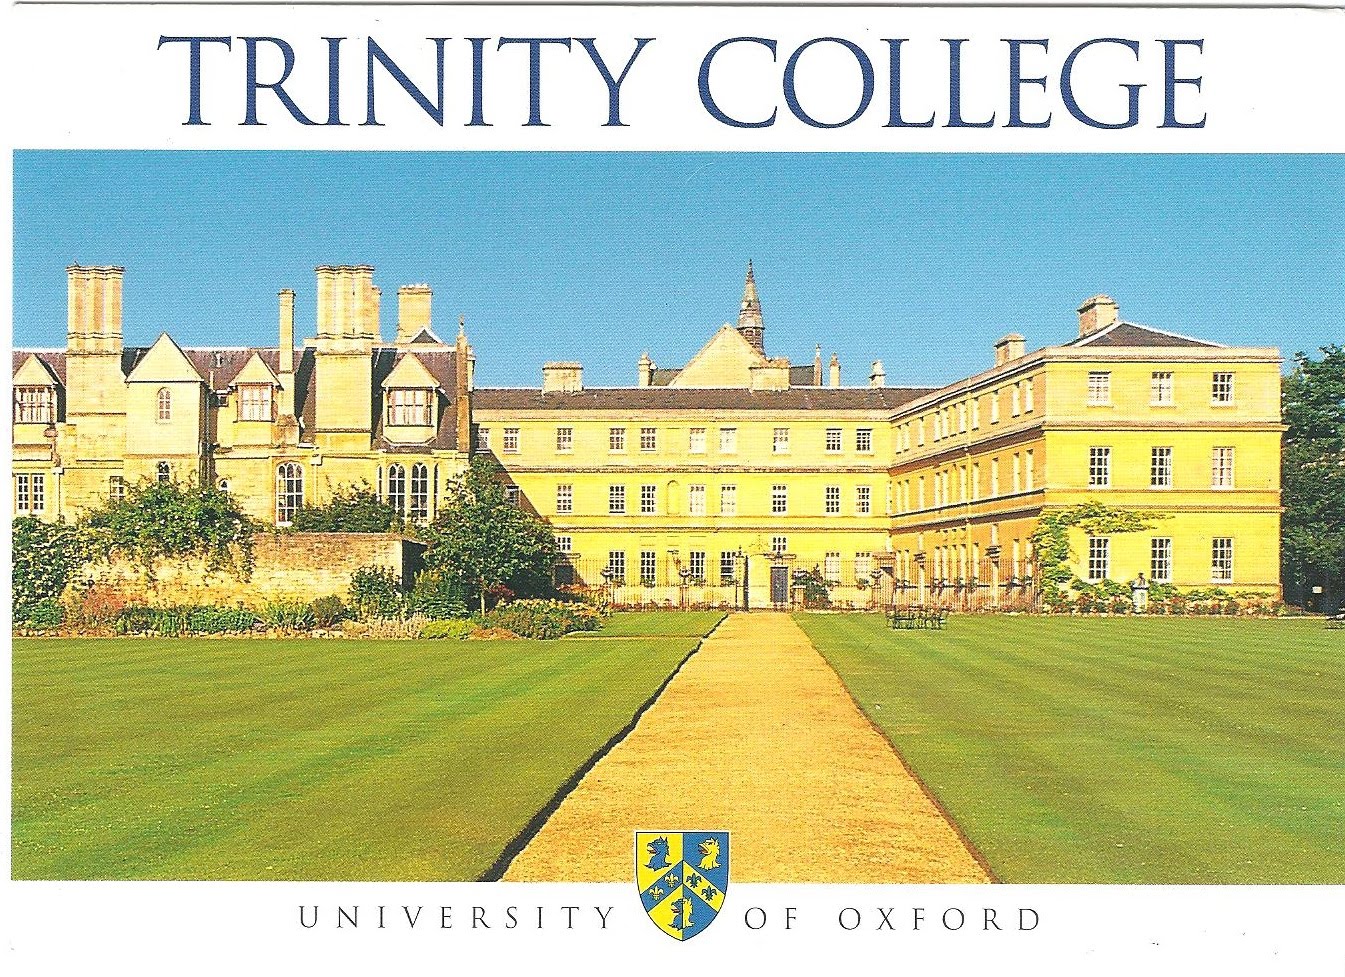 a-plethora-of-postcards-college-series-trinity-college-at-university-of-oxford